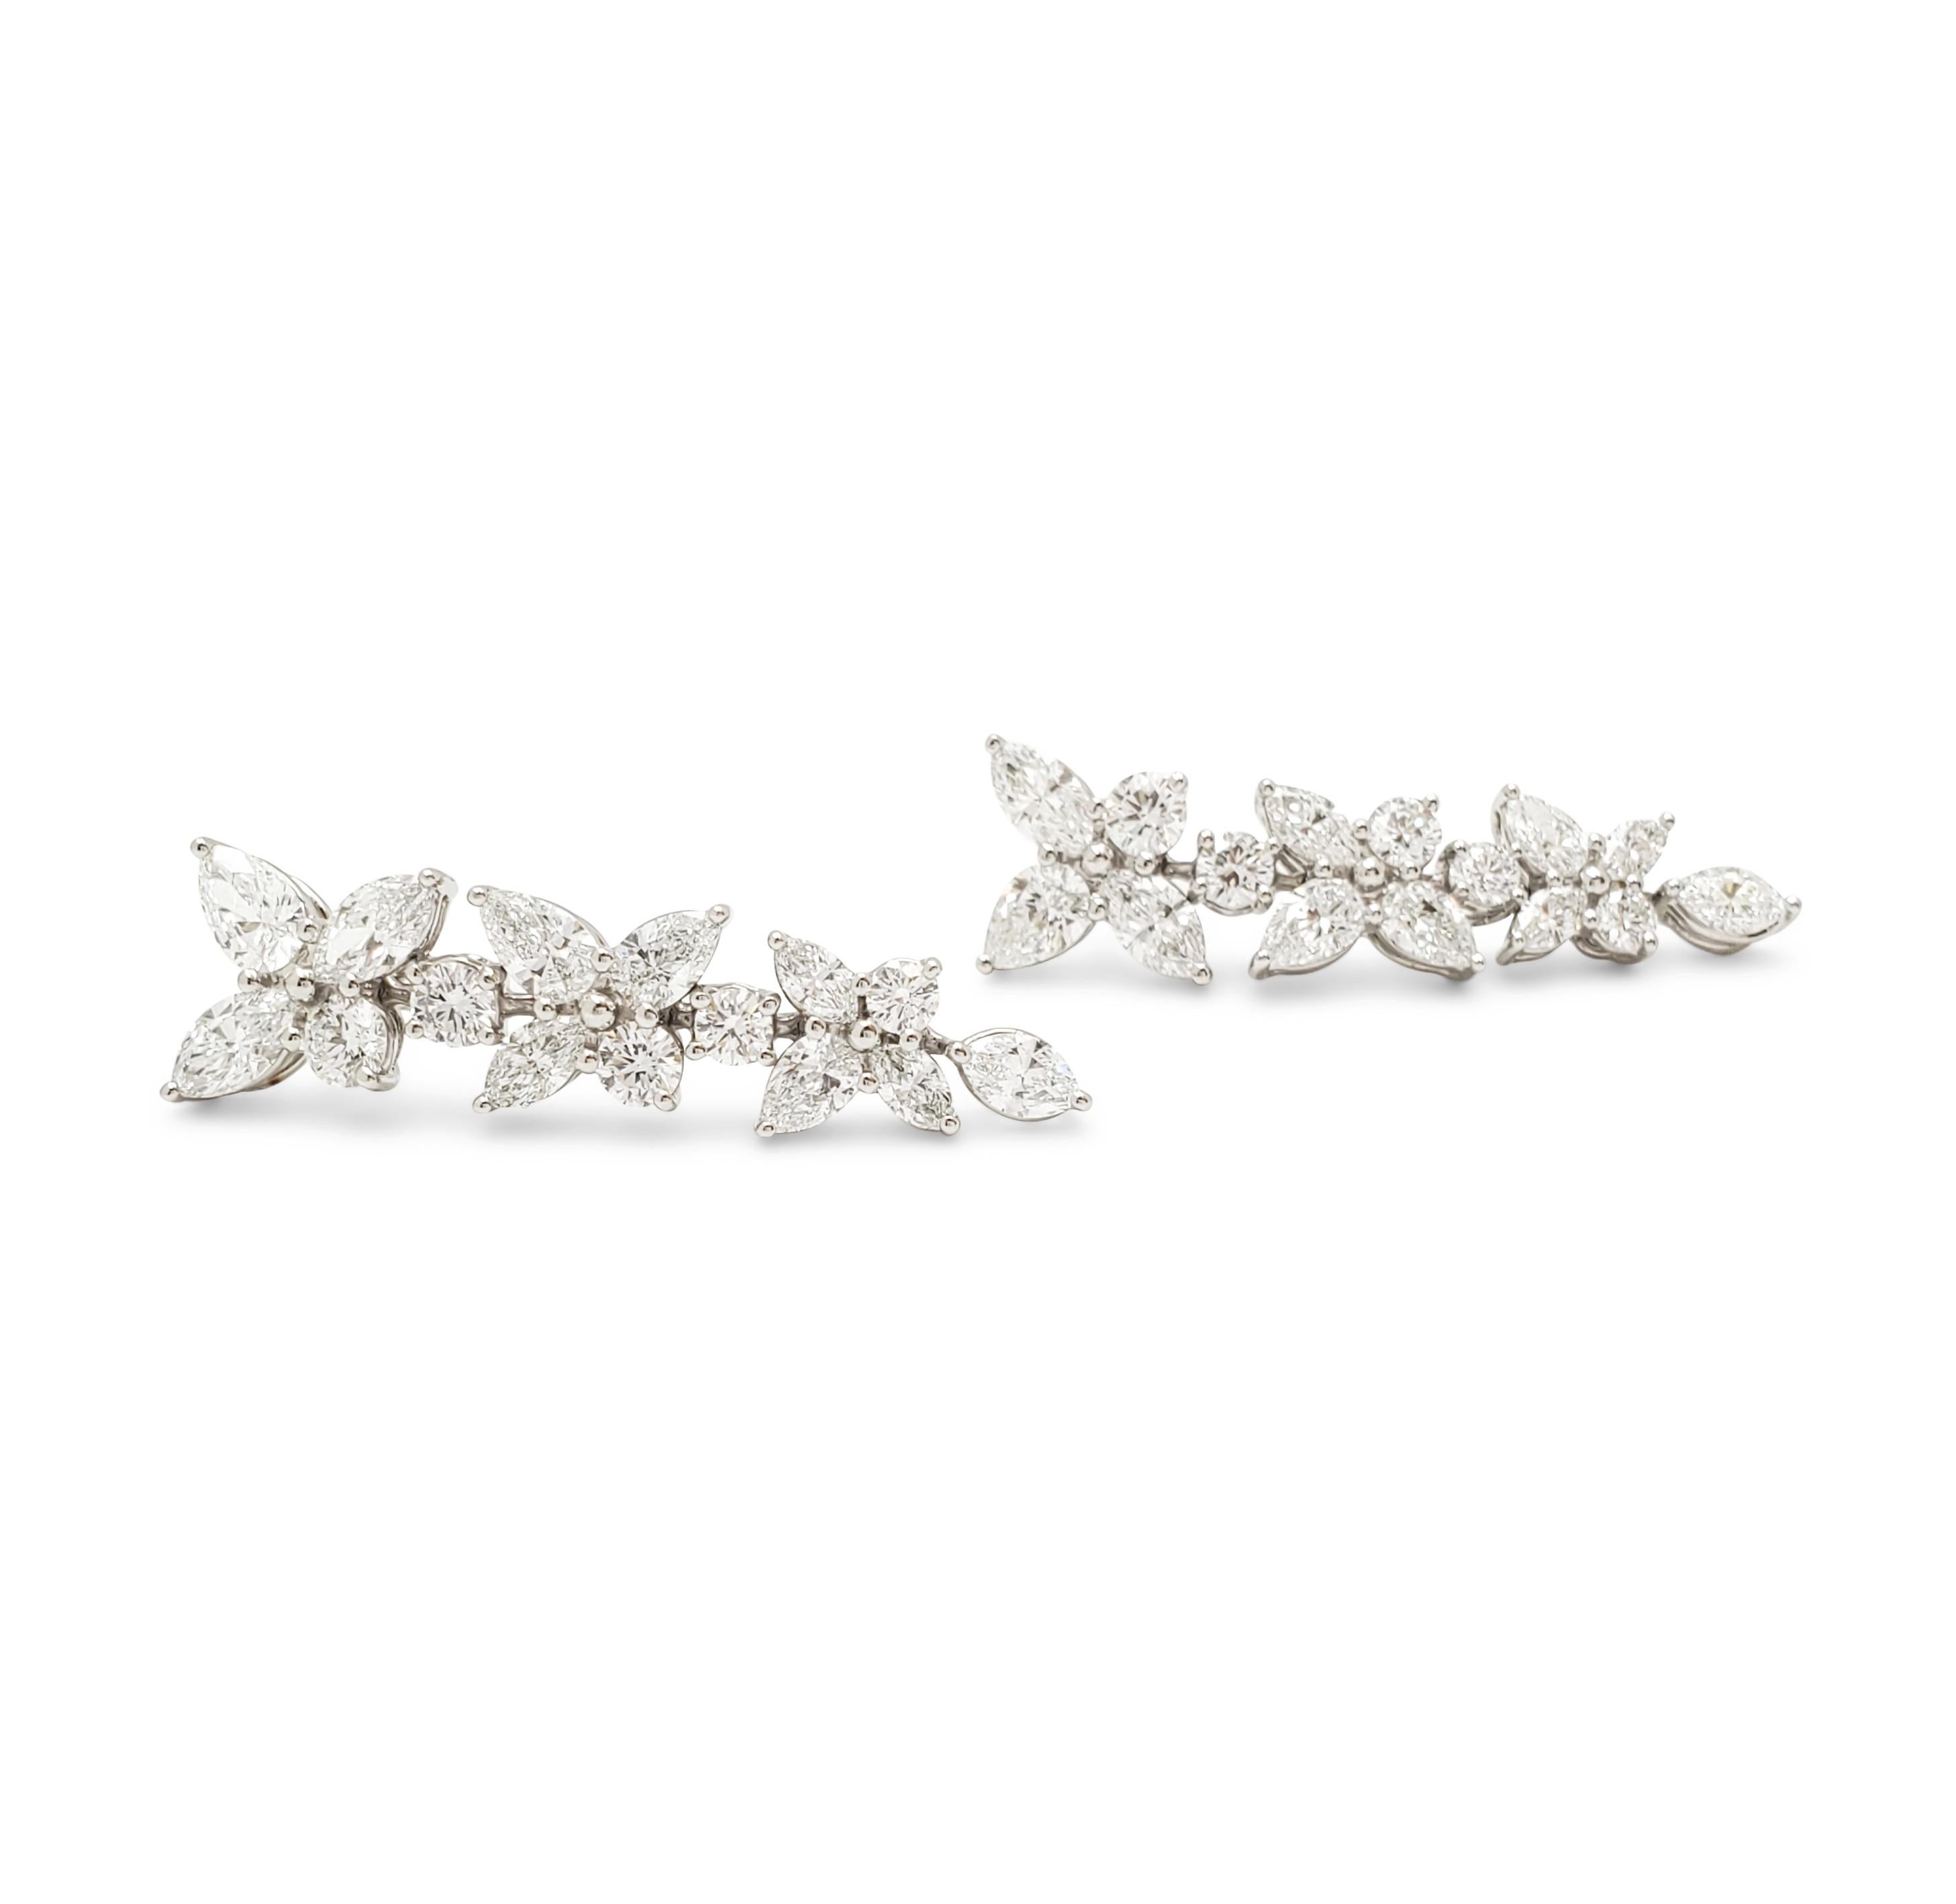 Authentic Tiffany & Co.  Victoria mixed cluster drop earrings crafted in Platinum.  The earrings are a playful twist on Tiffany & Co.'s iconic Victoria design featuring a mix of marquise, pear-shaped, and round brilliant cut diamonds of an estimated